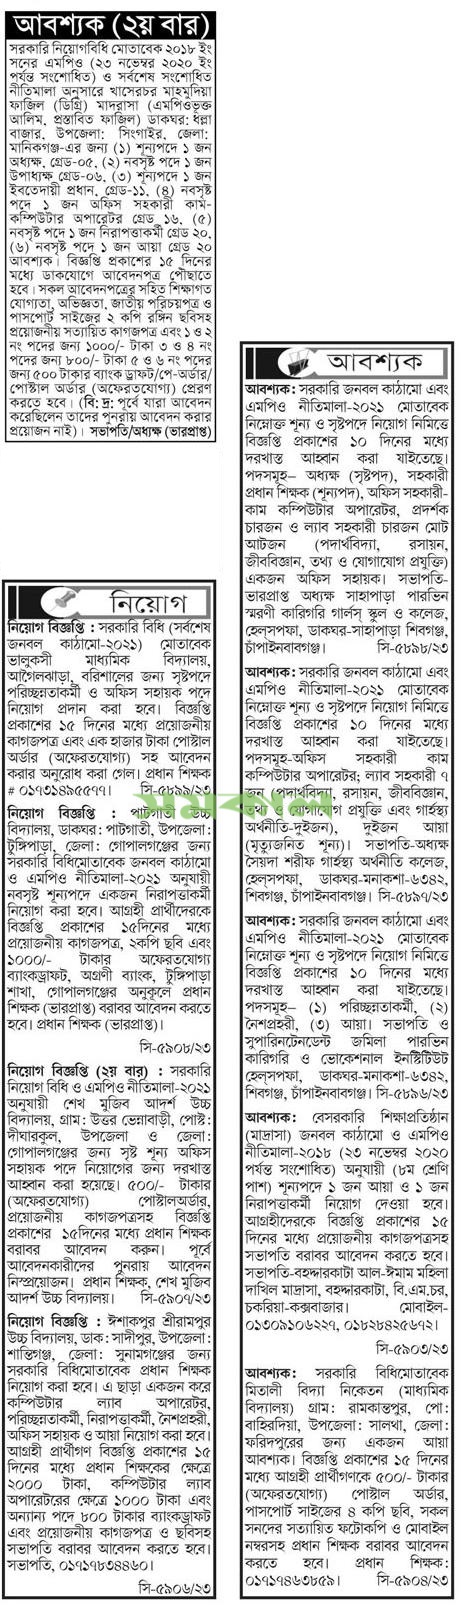 This job news was published on 05, 12. 2023, and collected from Samakal newspaper.